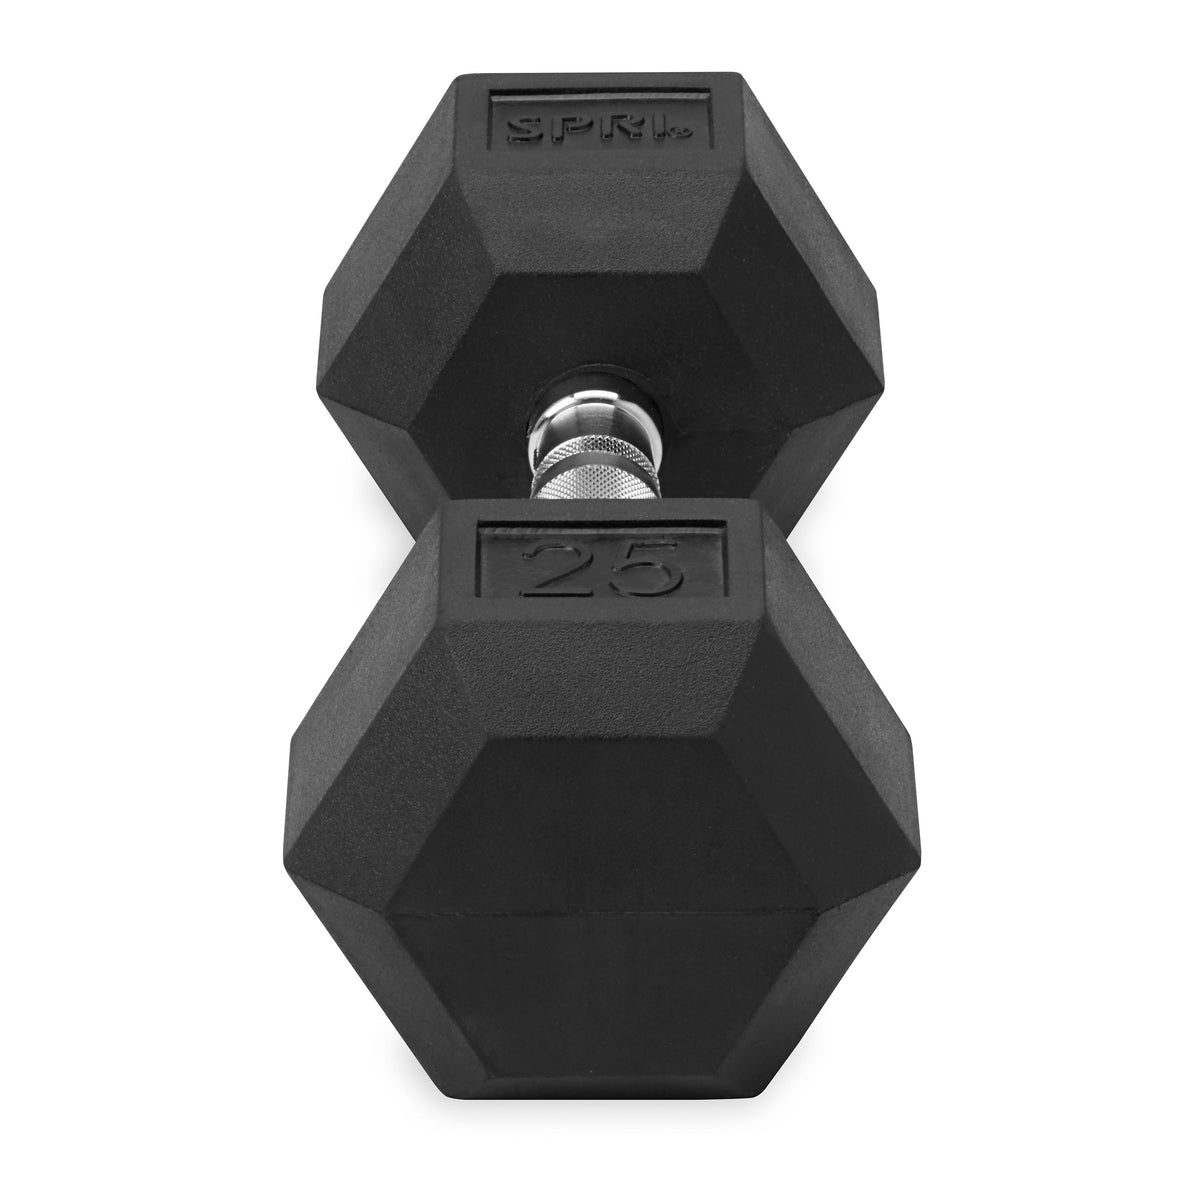 6-sided hex weights 25lbs angled view